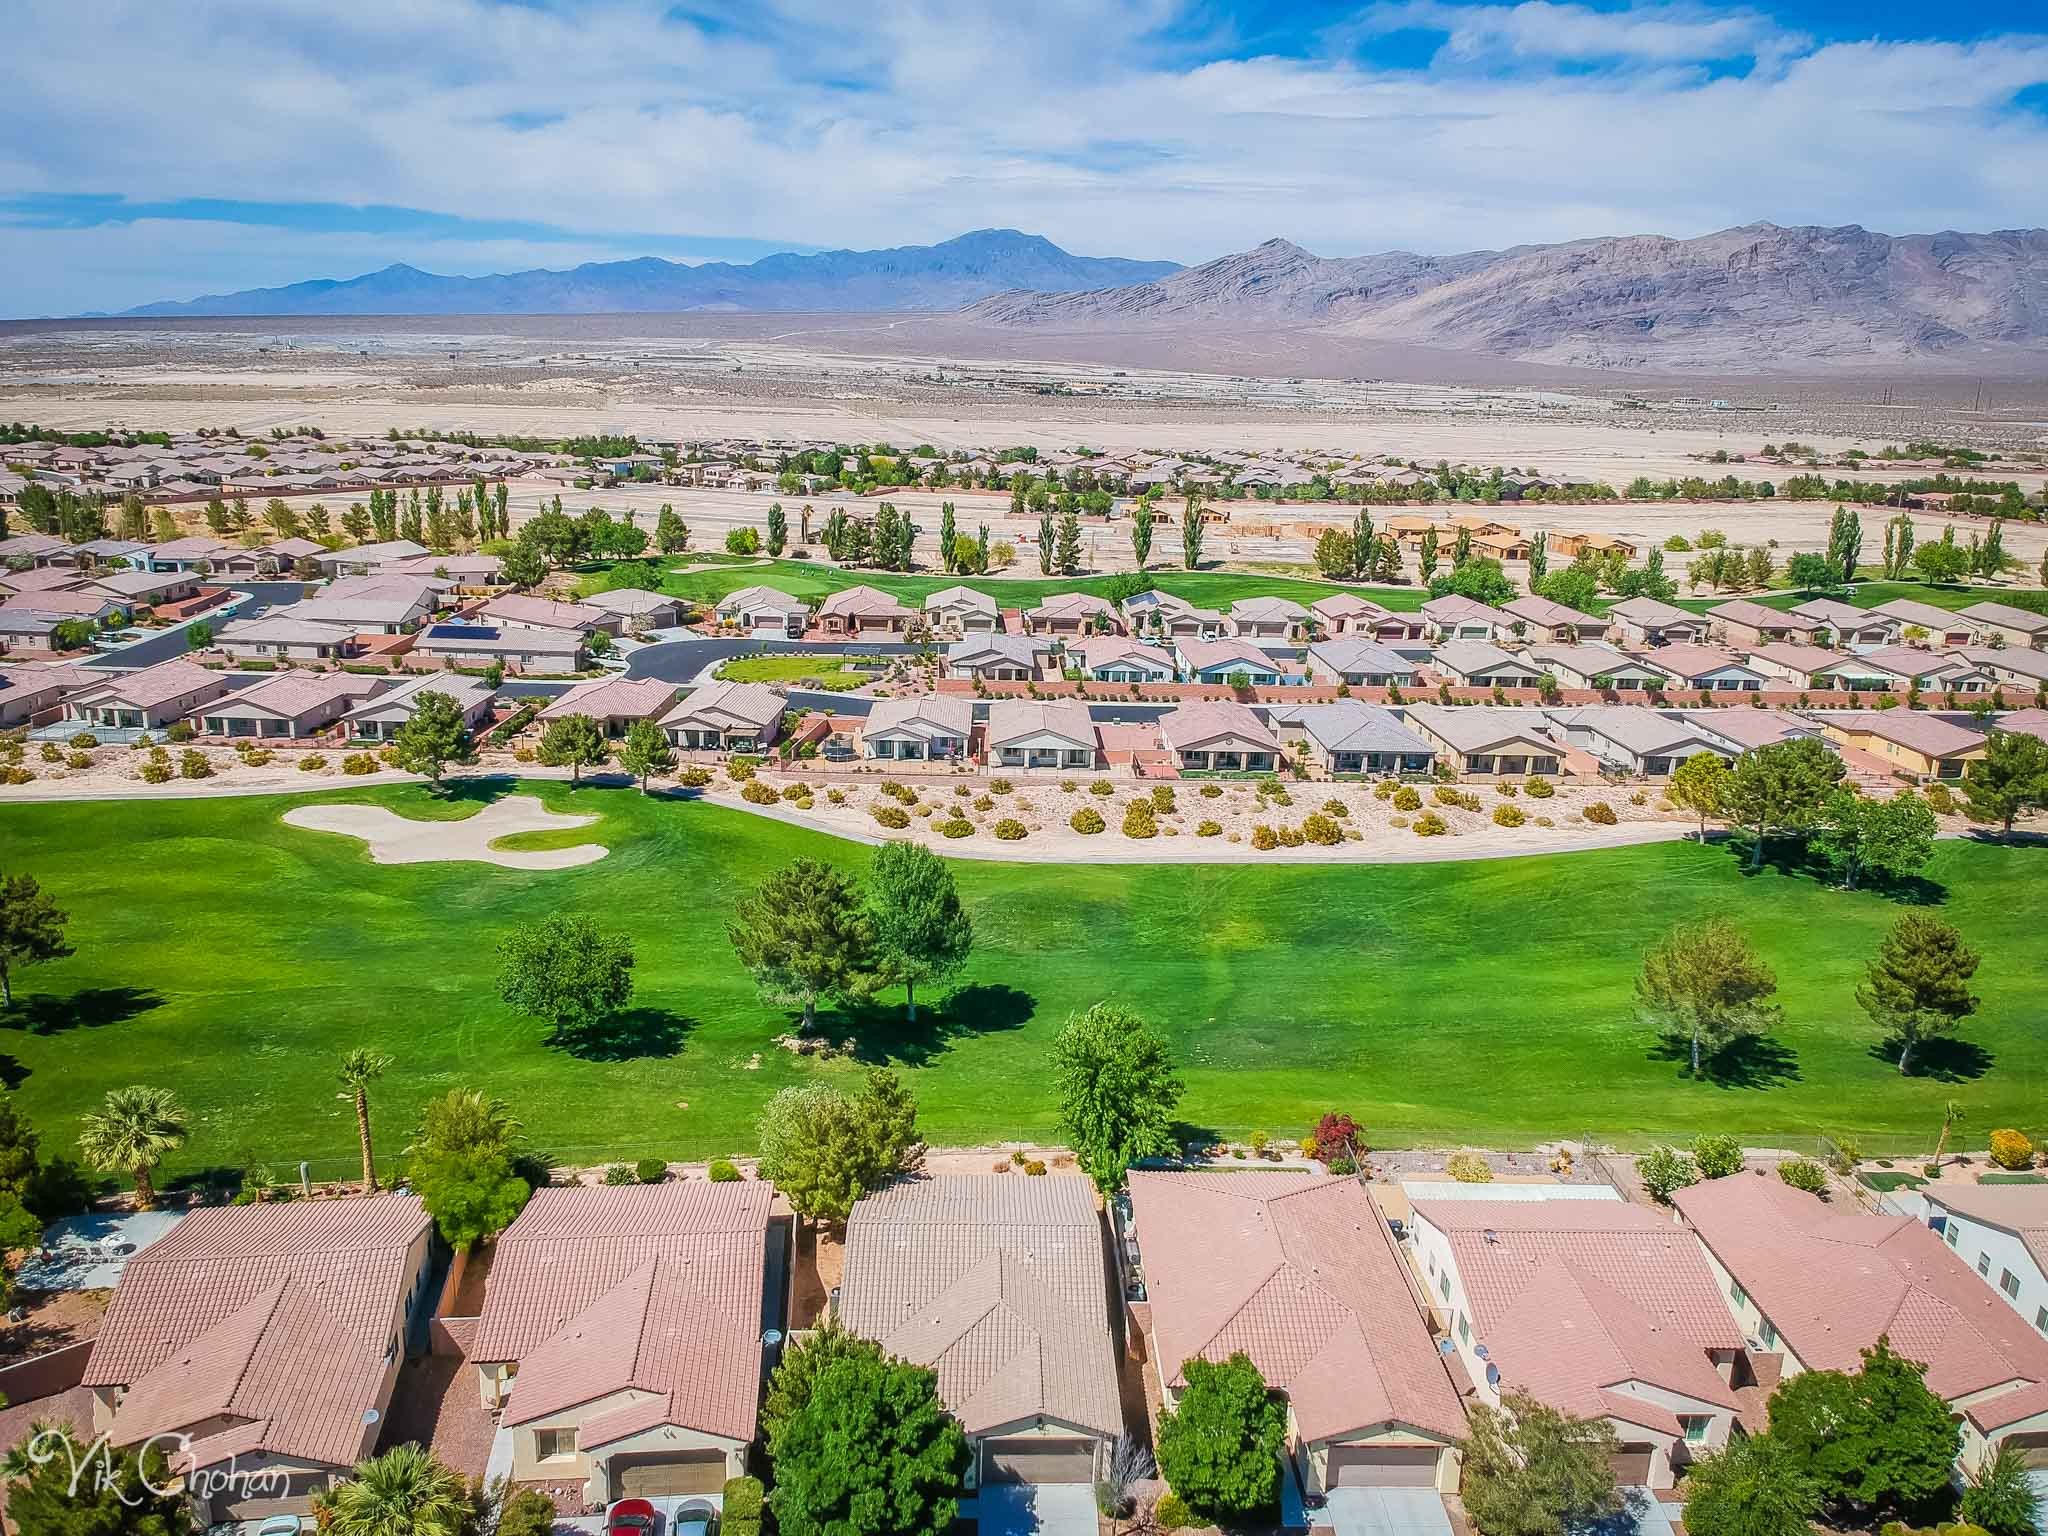 2022-05-15-5378-E-Cansano-St-Pahrump-Real-Estate-Photography-Virtual-Tour-Drone-Photography-Vik-Chohan-Photography-Photo-Booth-Social-Media-VCP-127.jpg